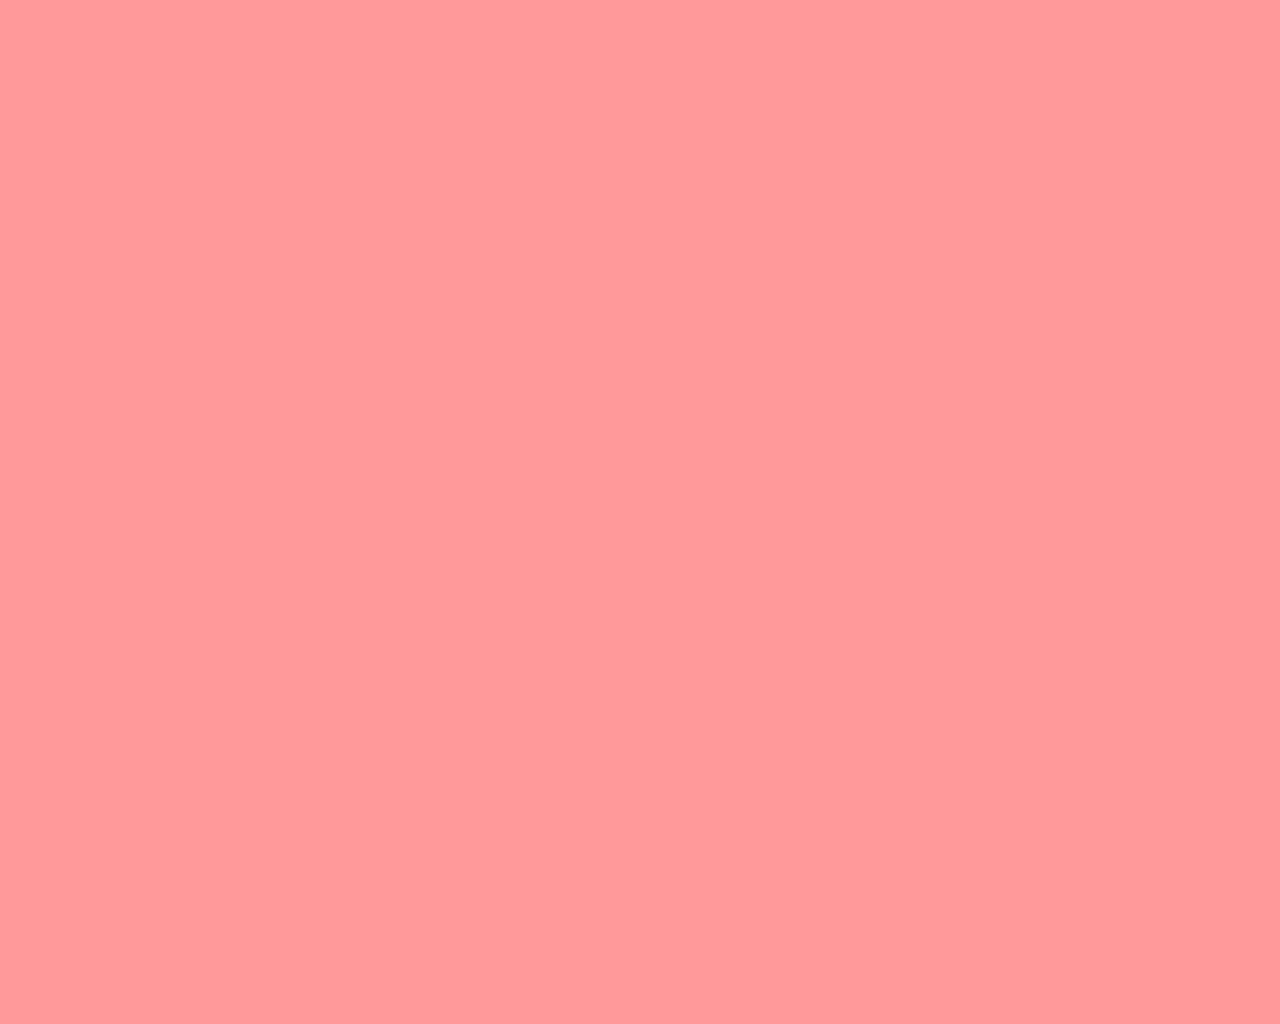 A pink background with no text - Salmon